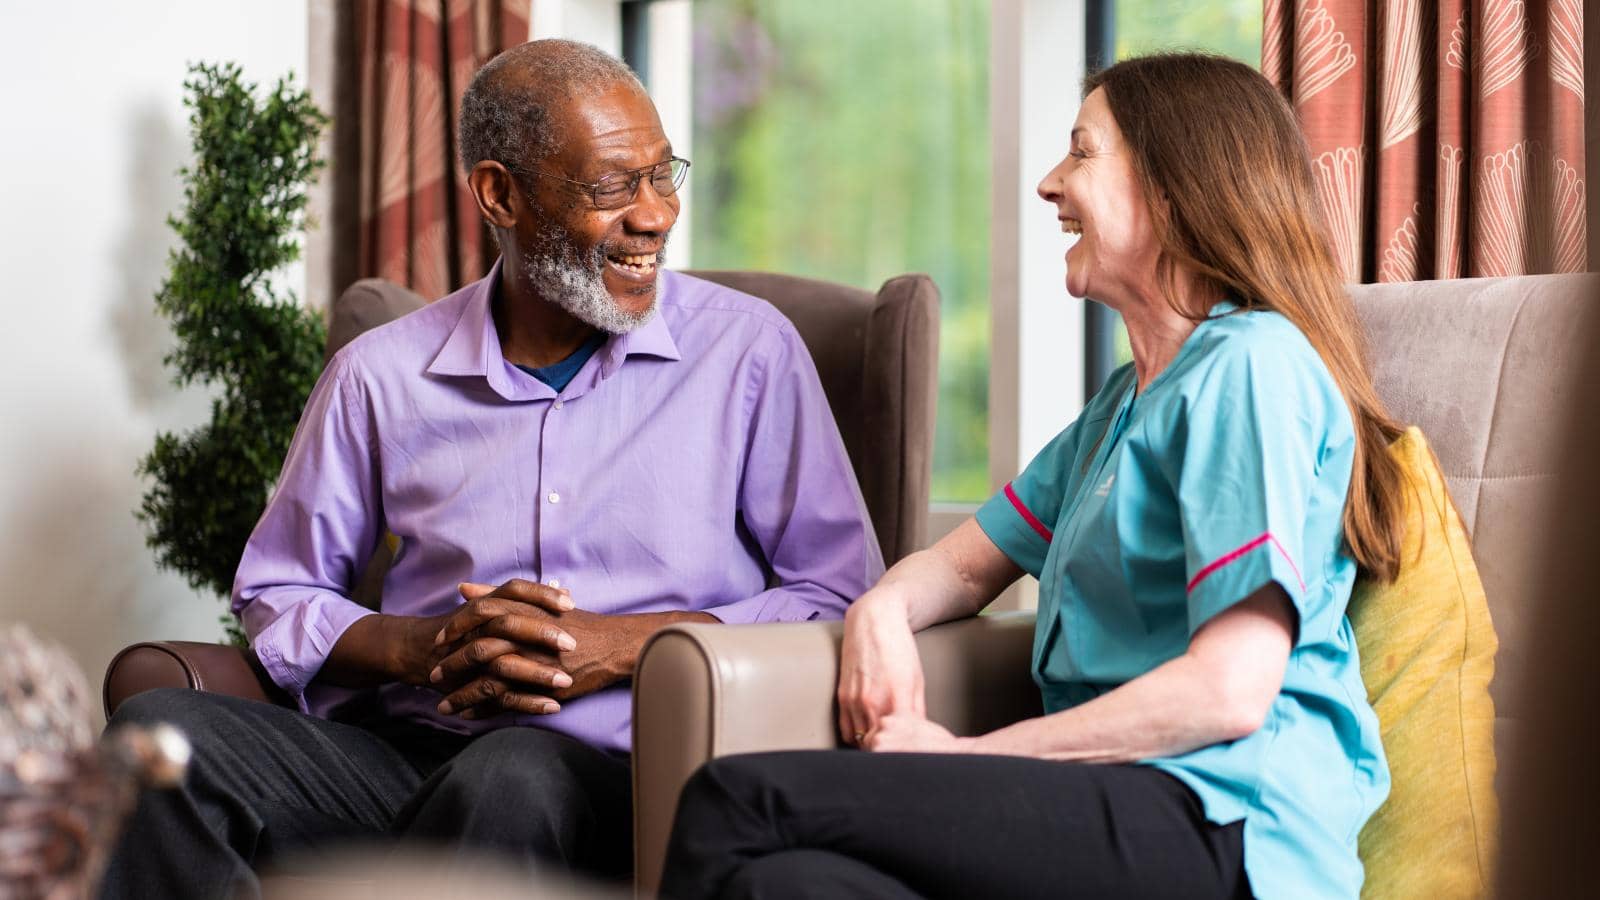 Older man with grey hair wearing a purple shirt and sat in an armchair laughing with female care assistant